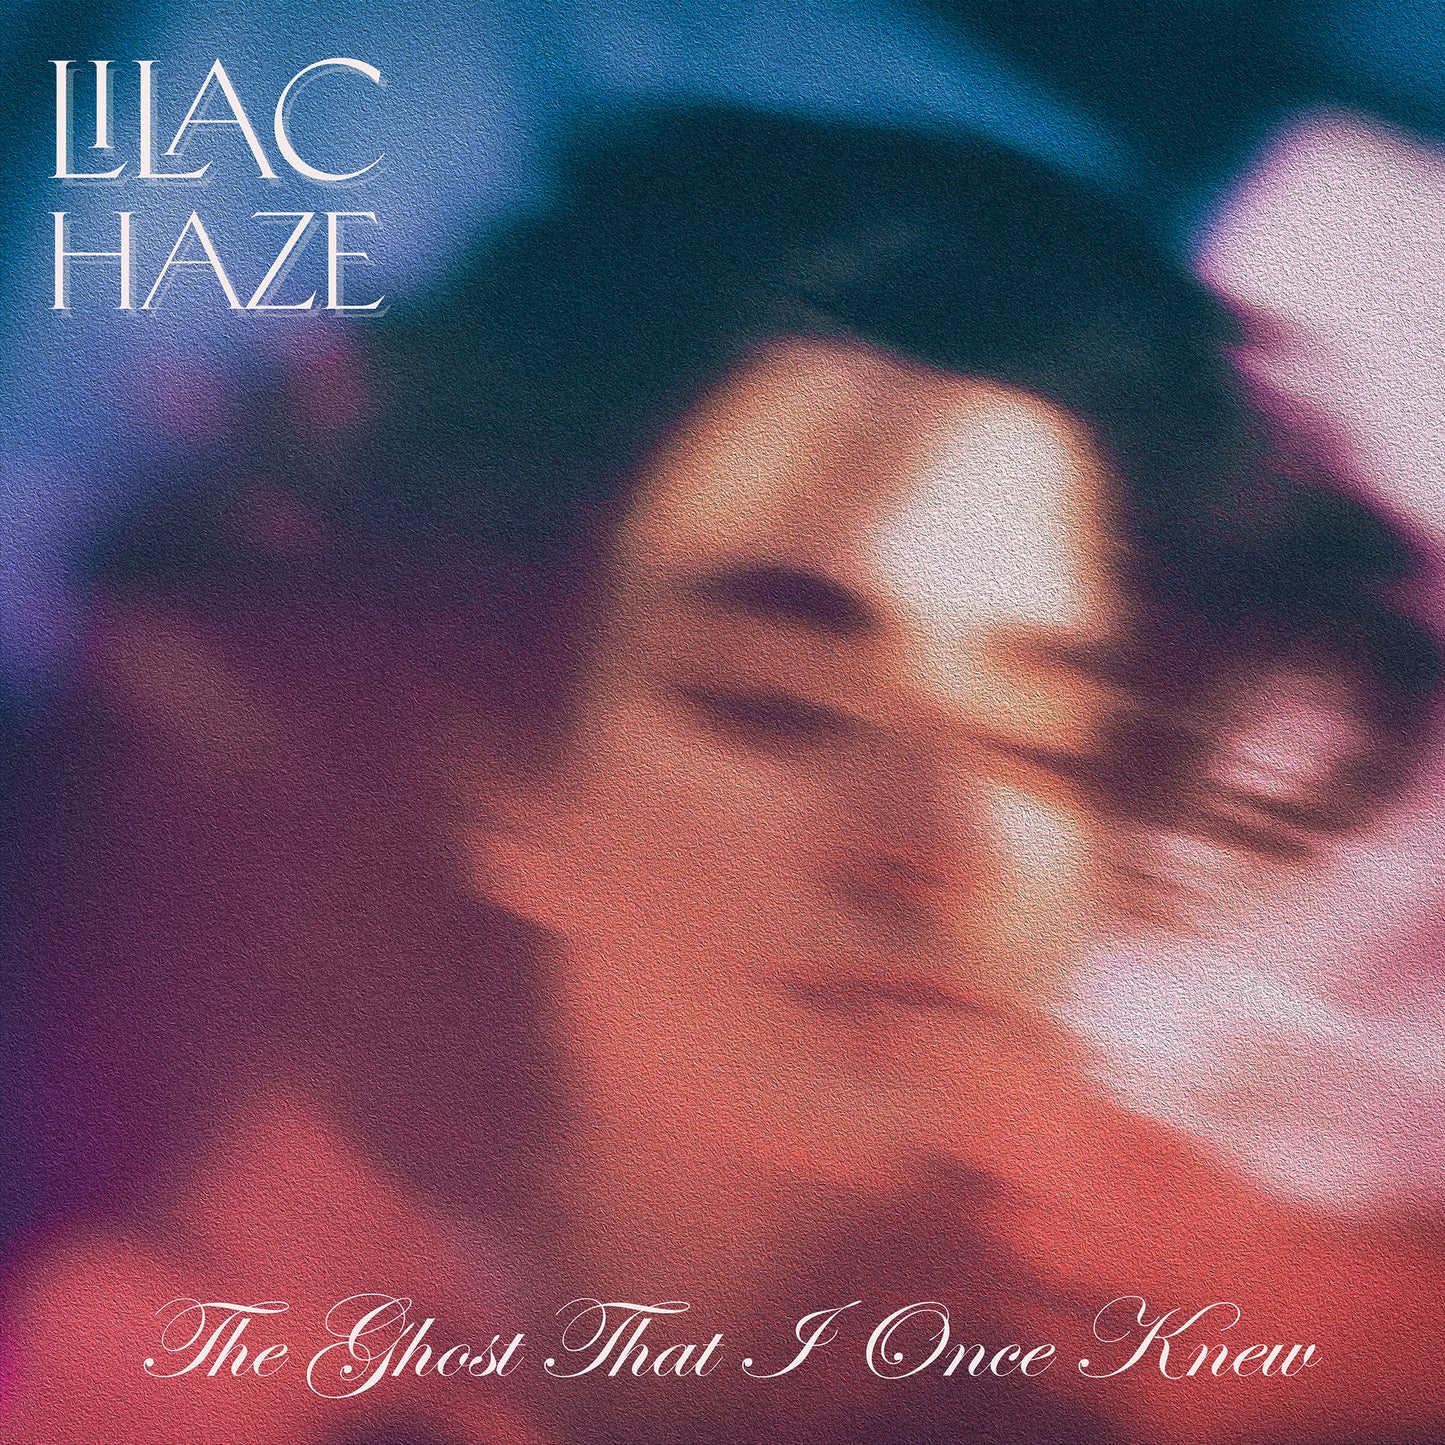 The Ghost That I Once Knew // Lilac Haze